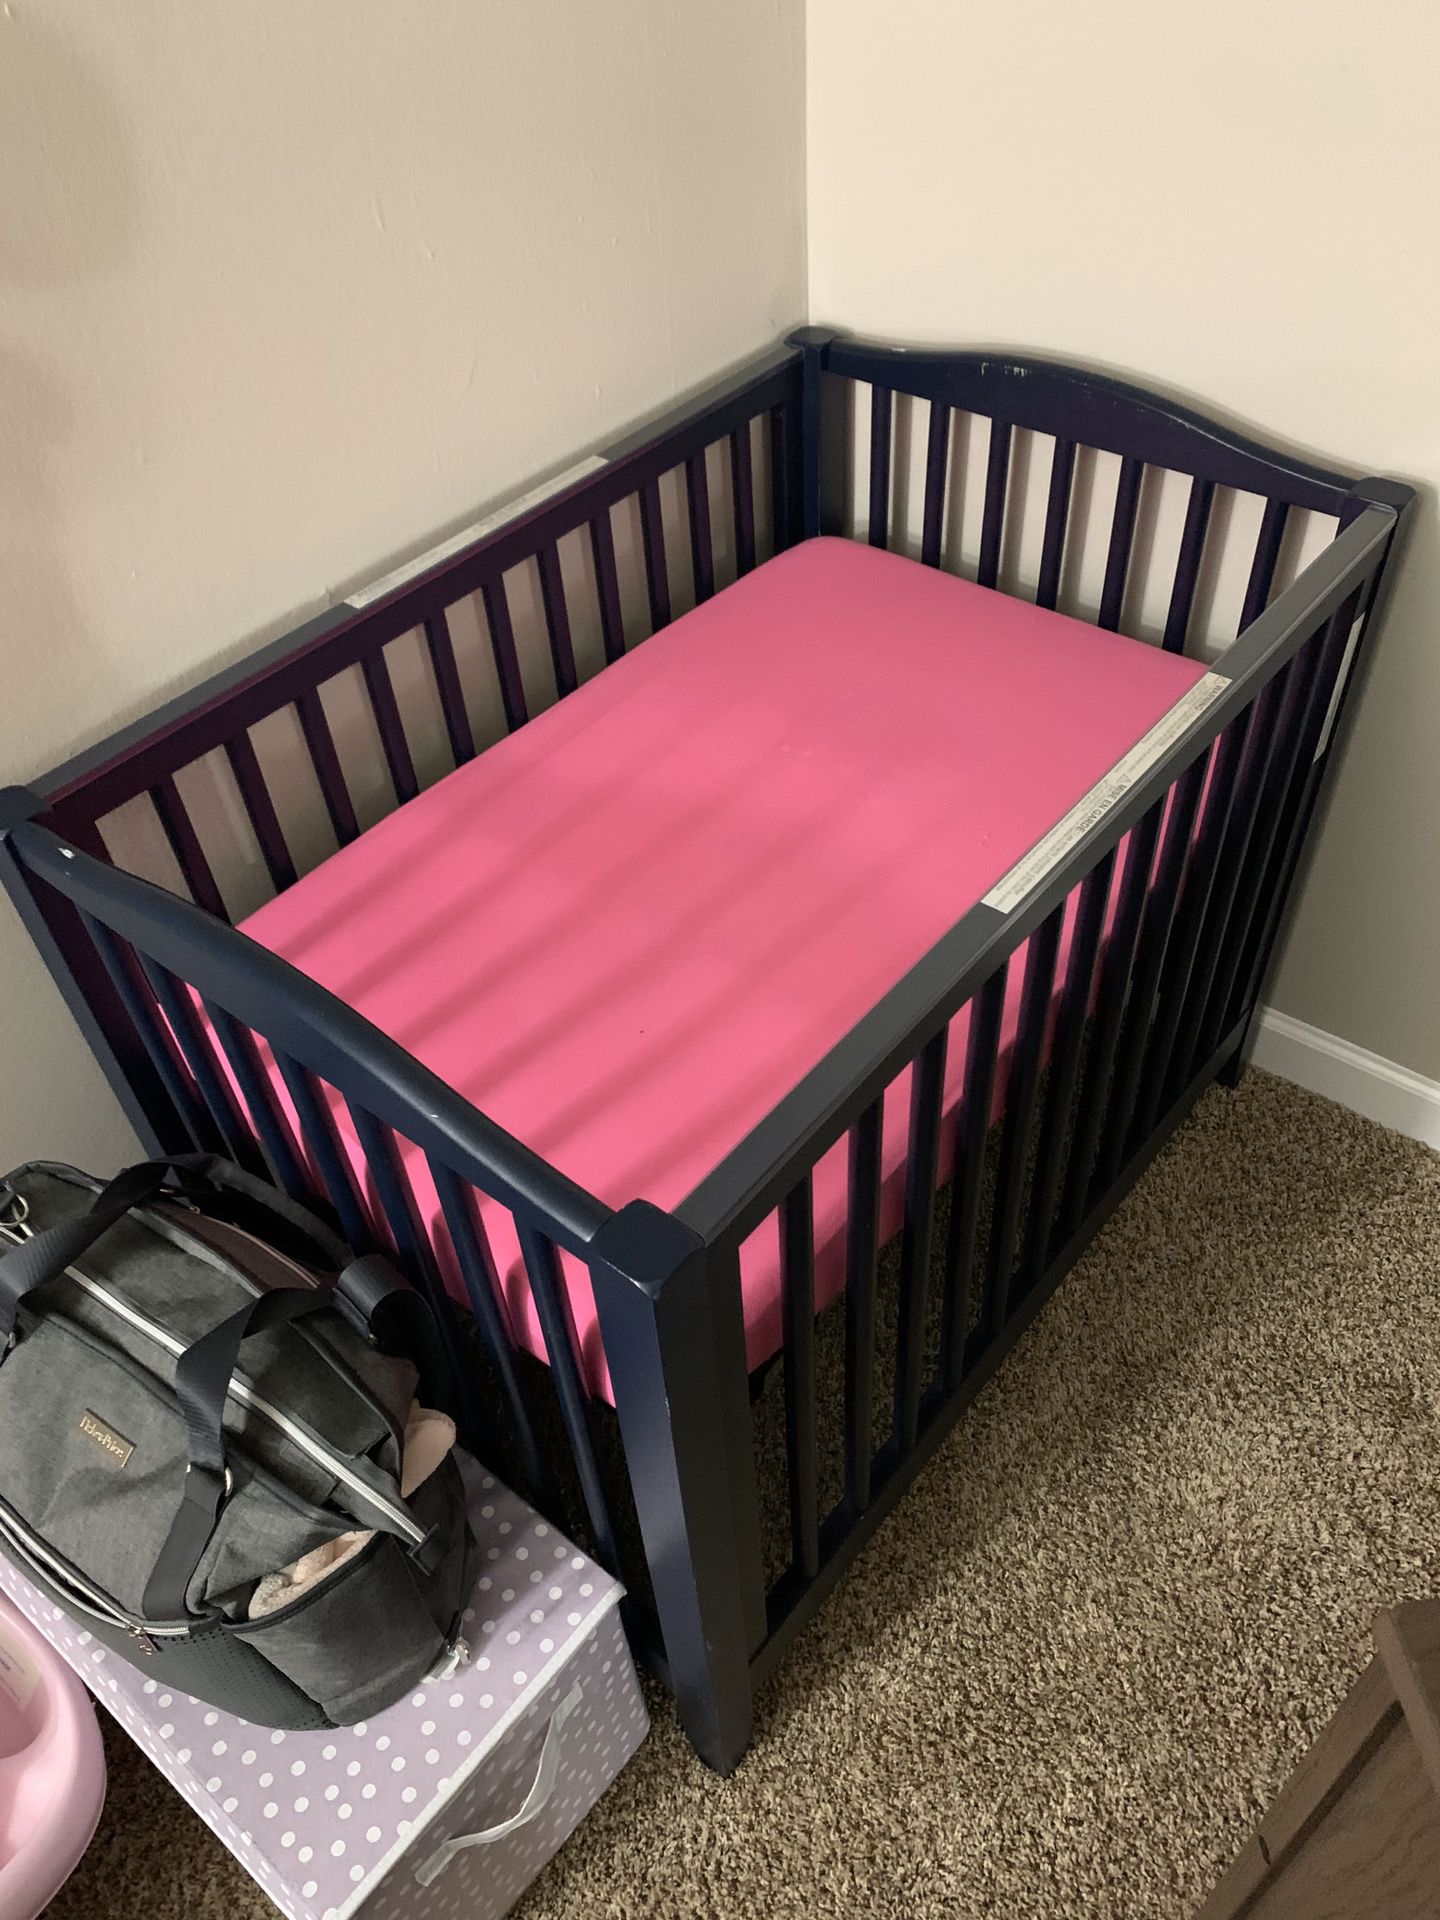 Mini crib and changing table with misc baby stuff